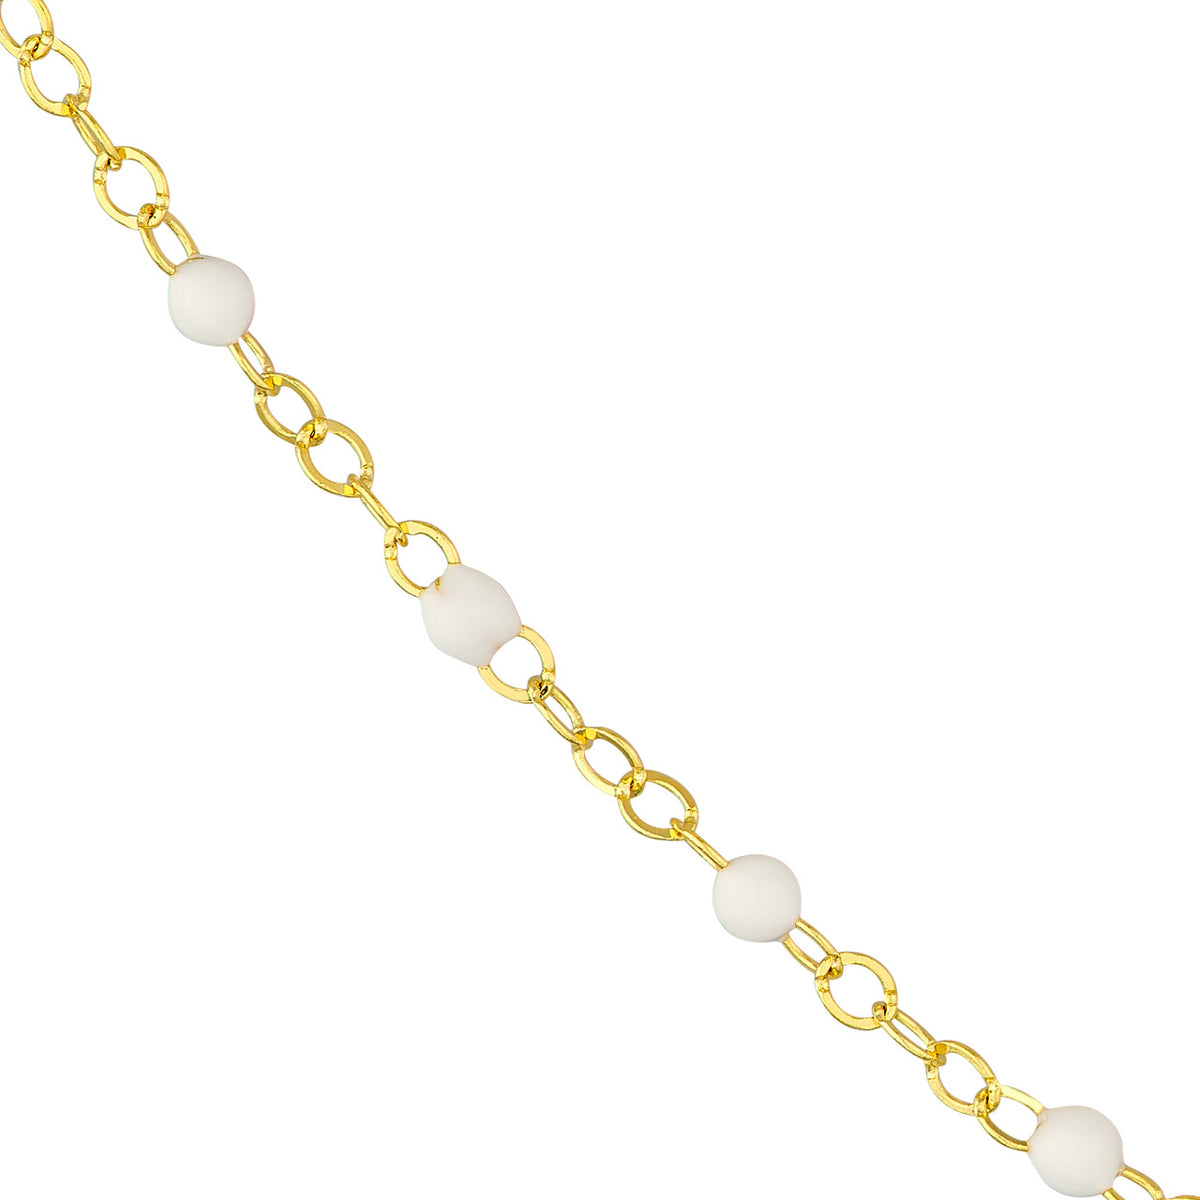 14K Yellow Gold White Enamel Bead Station Chain Necklace